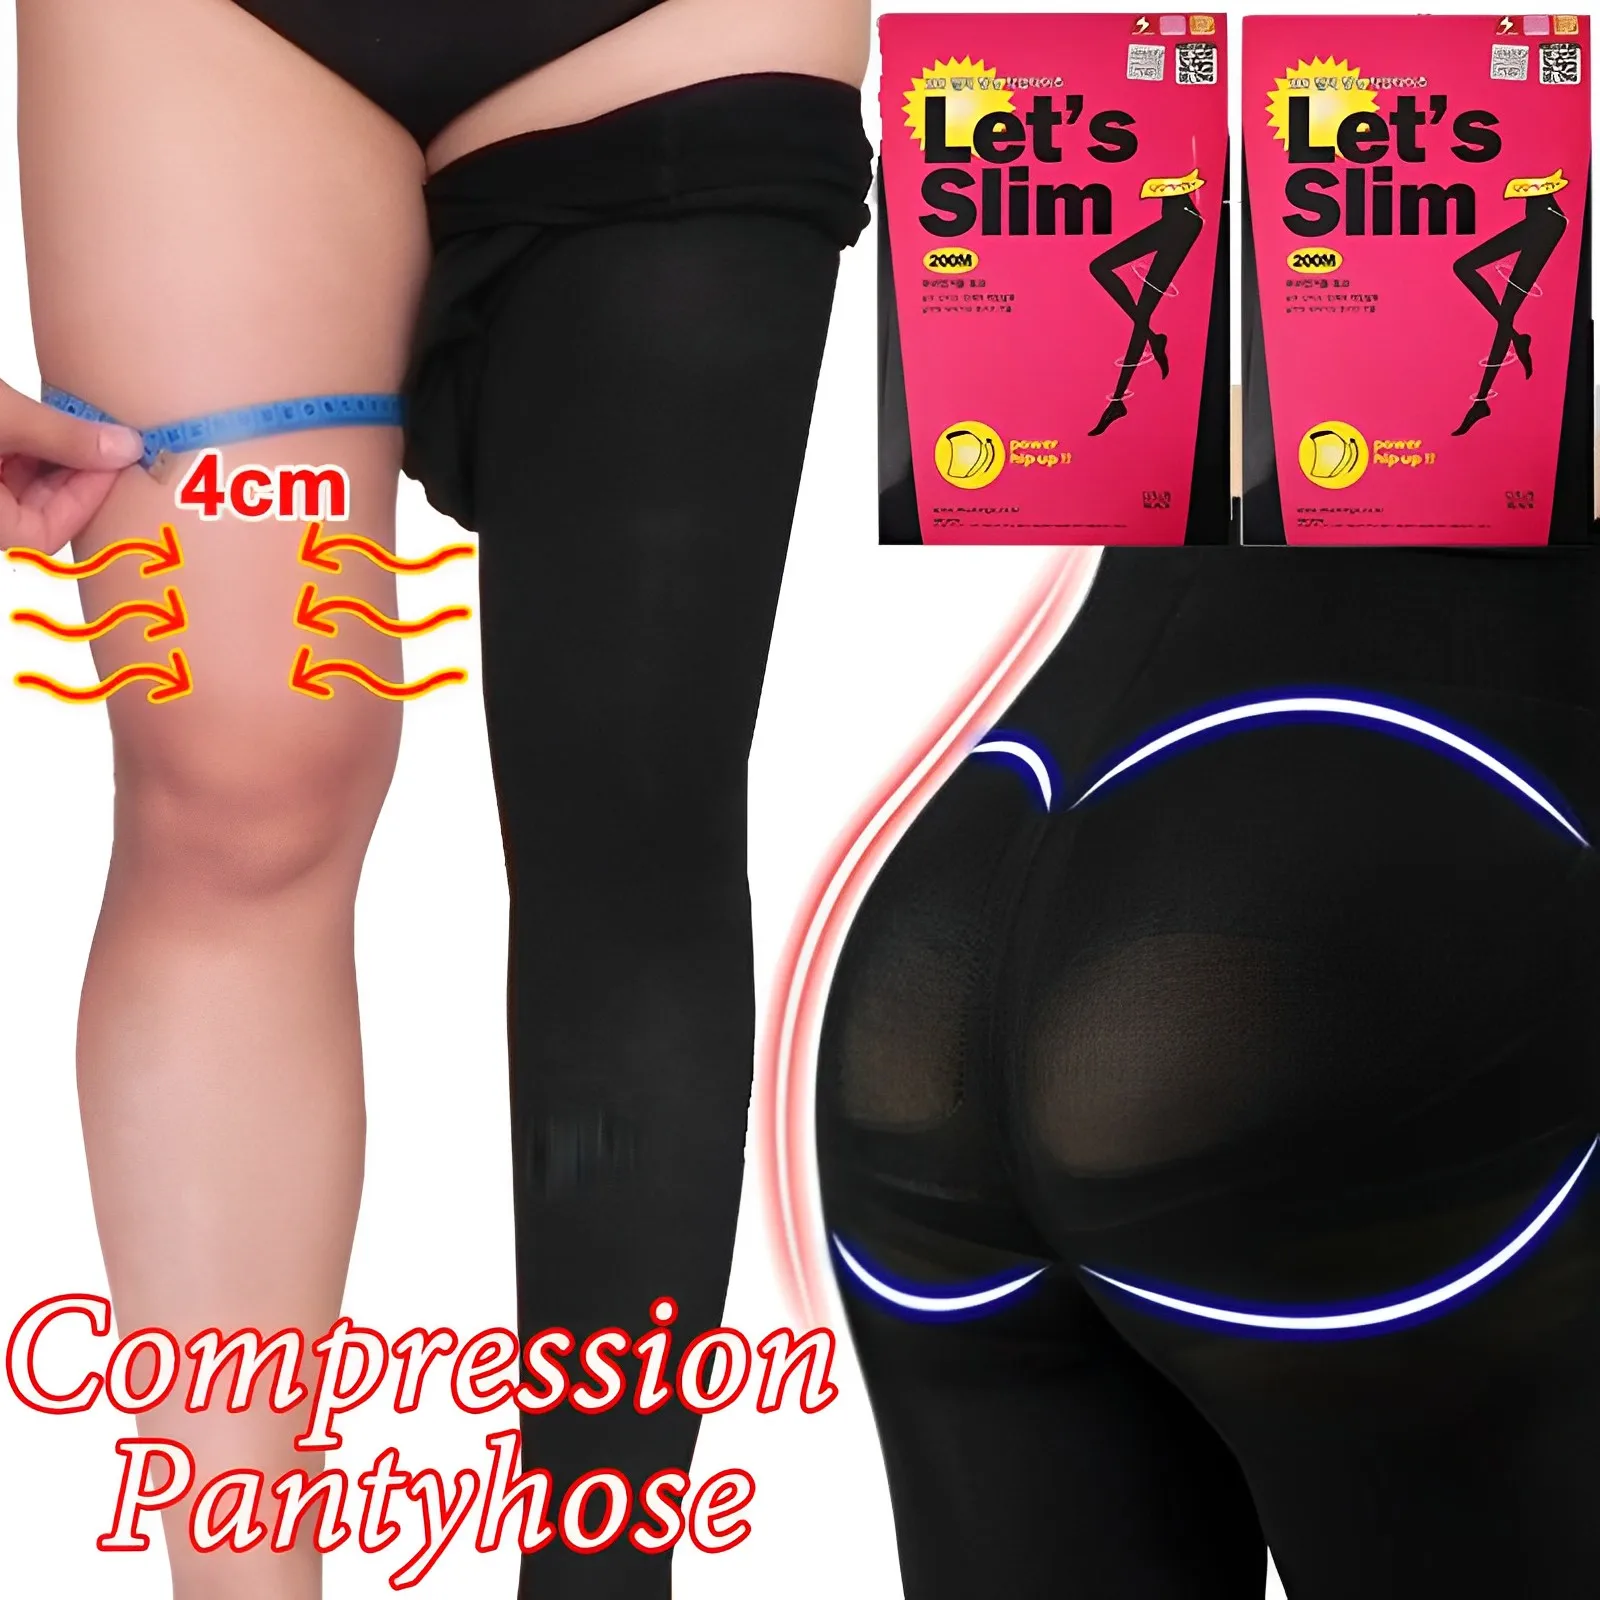 

Women Slim Tights Compression Stockings Pantyhose Varicose Veins Fat Calorie Burn Leg Shaping Stovepipe Stocking Foot Care Tool